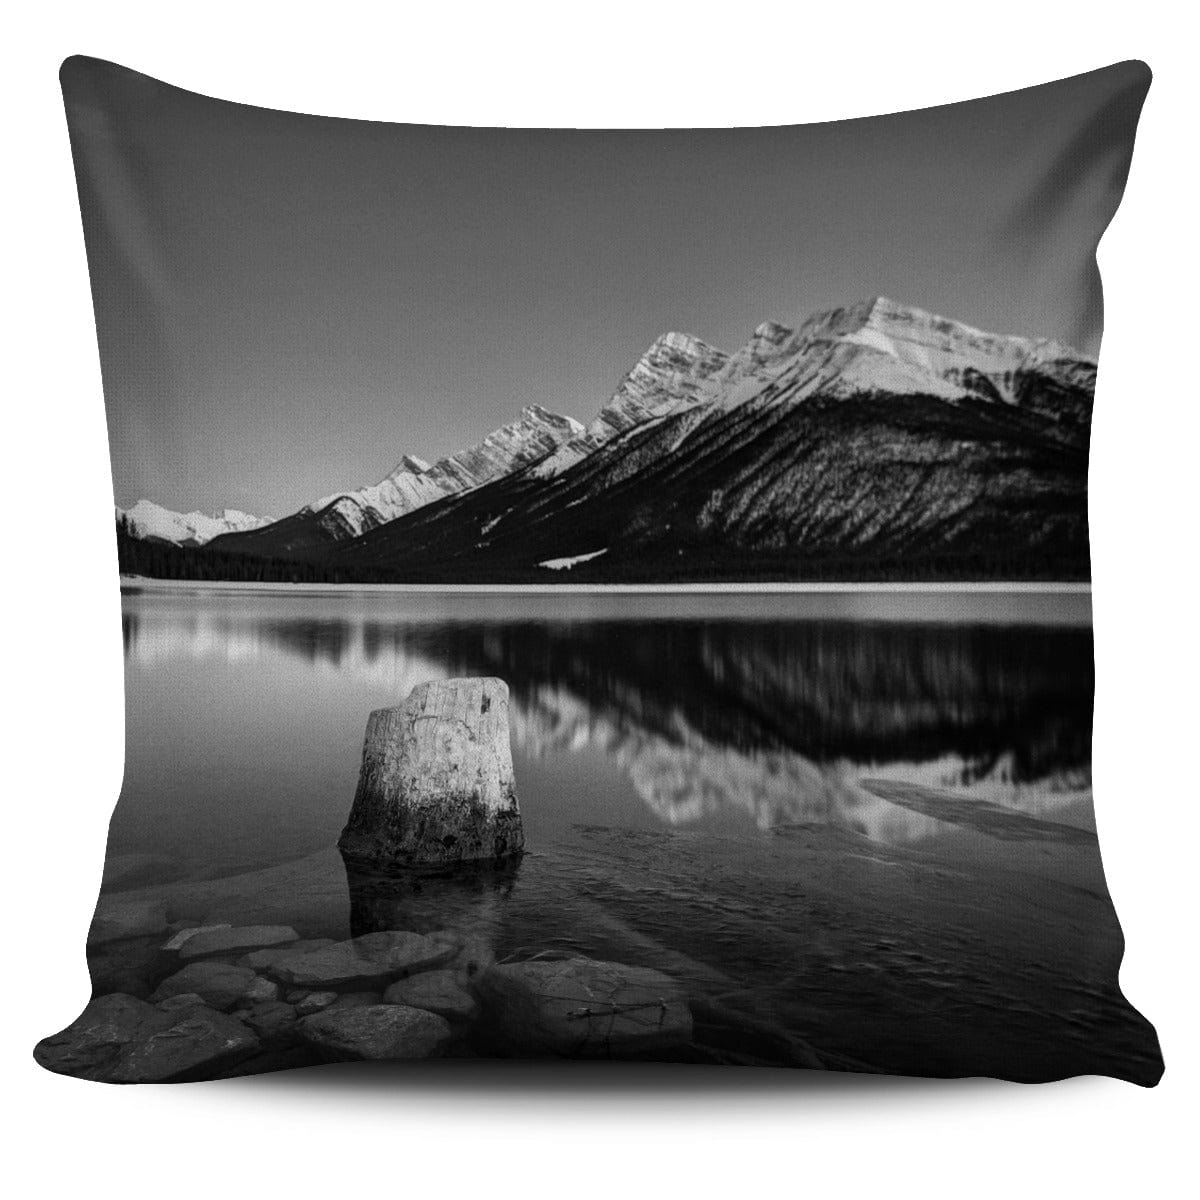 Pillow Cover - Spray Lakes - Black and White